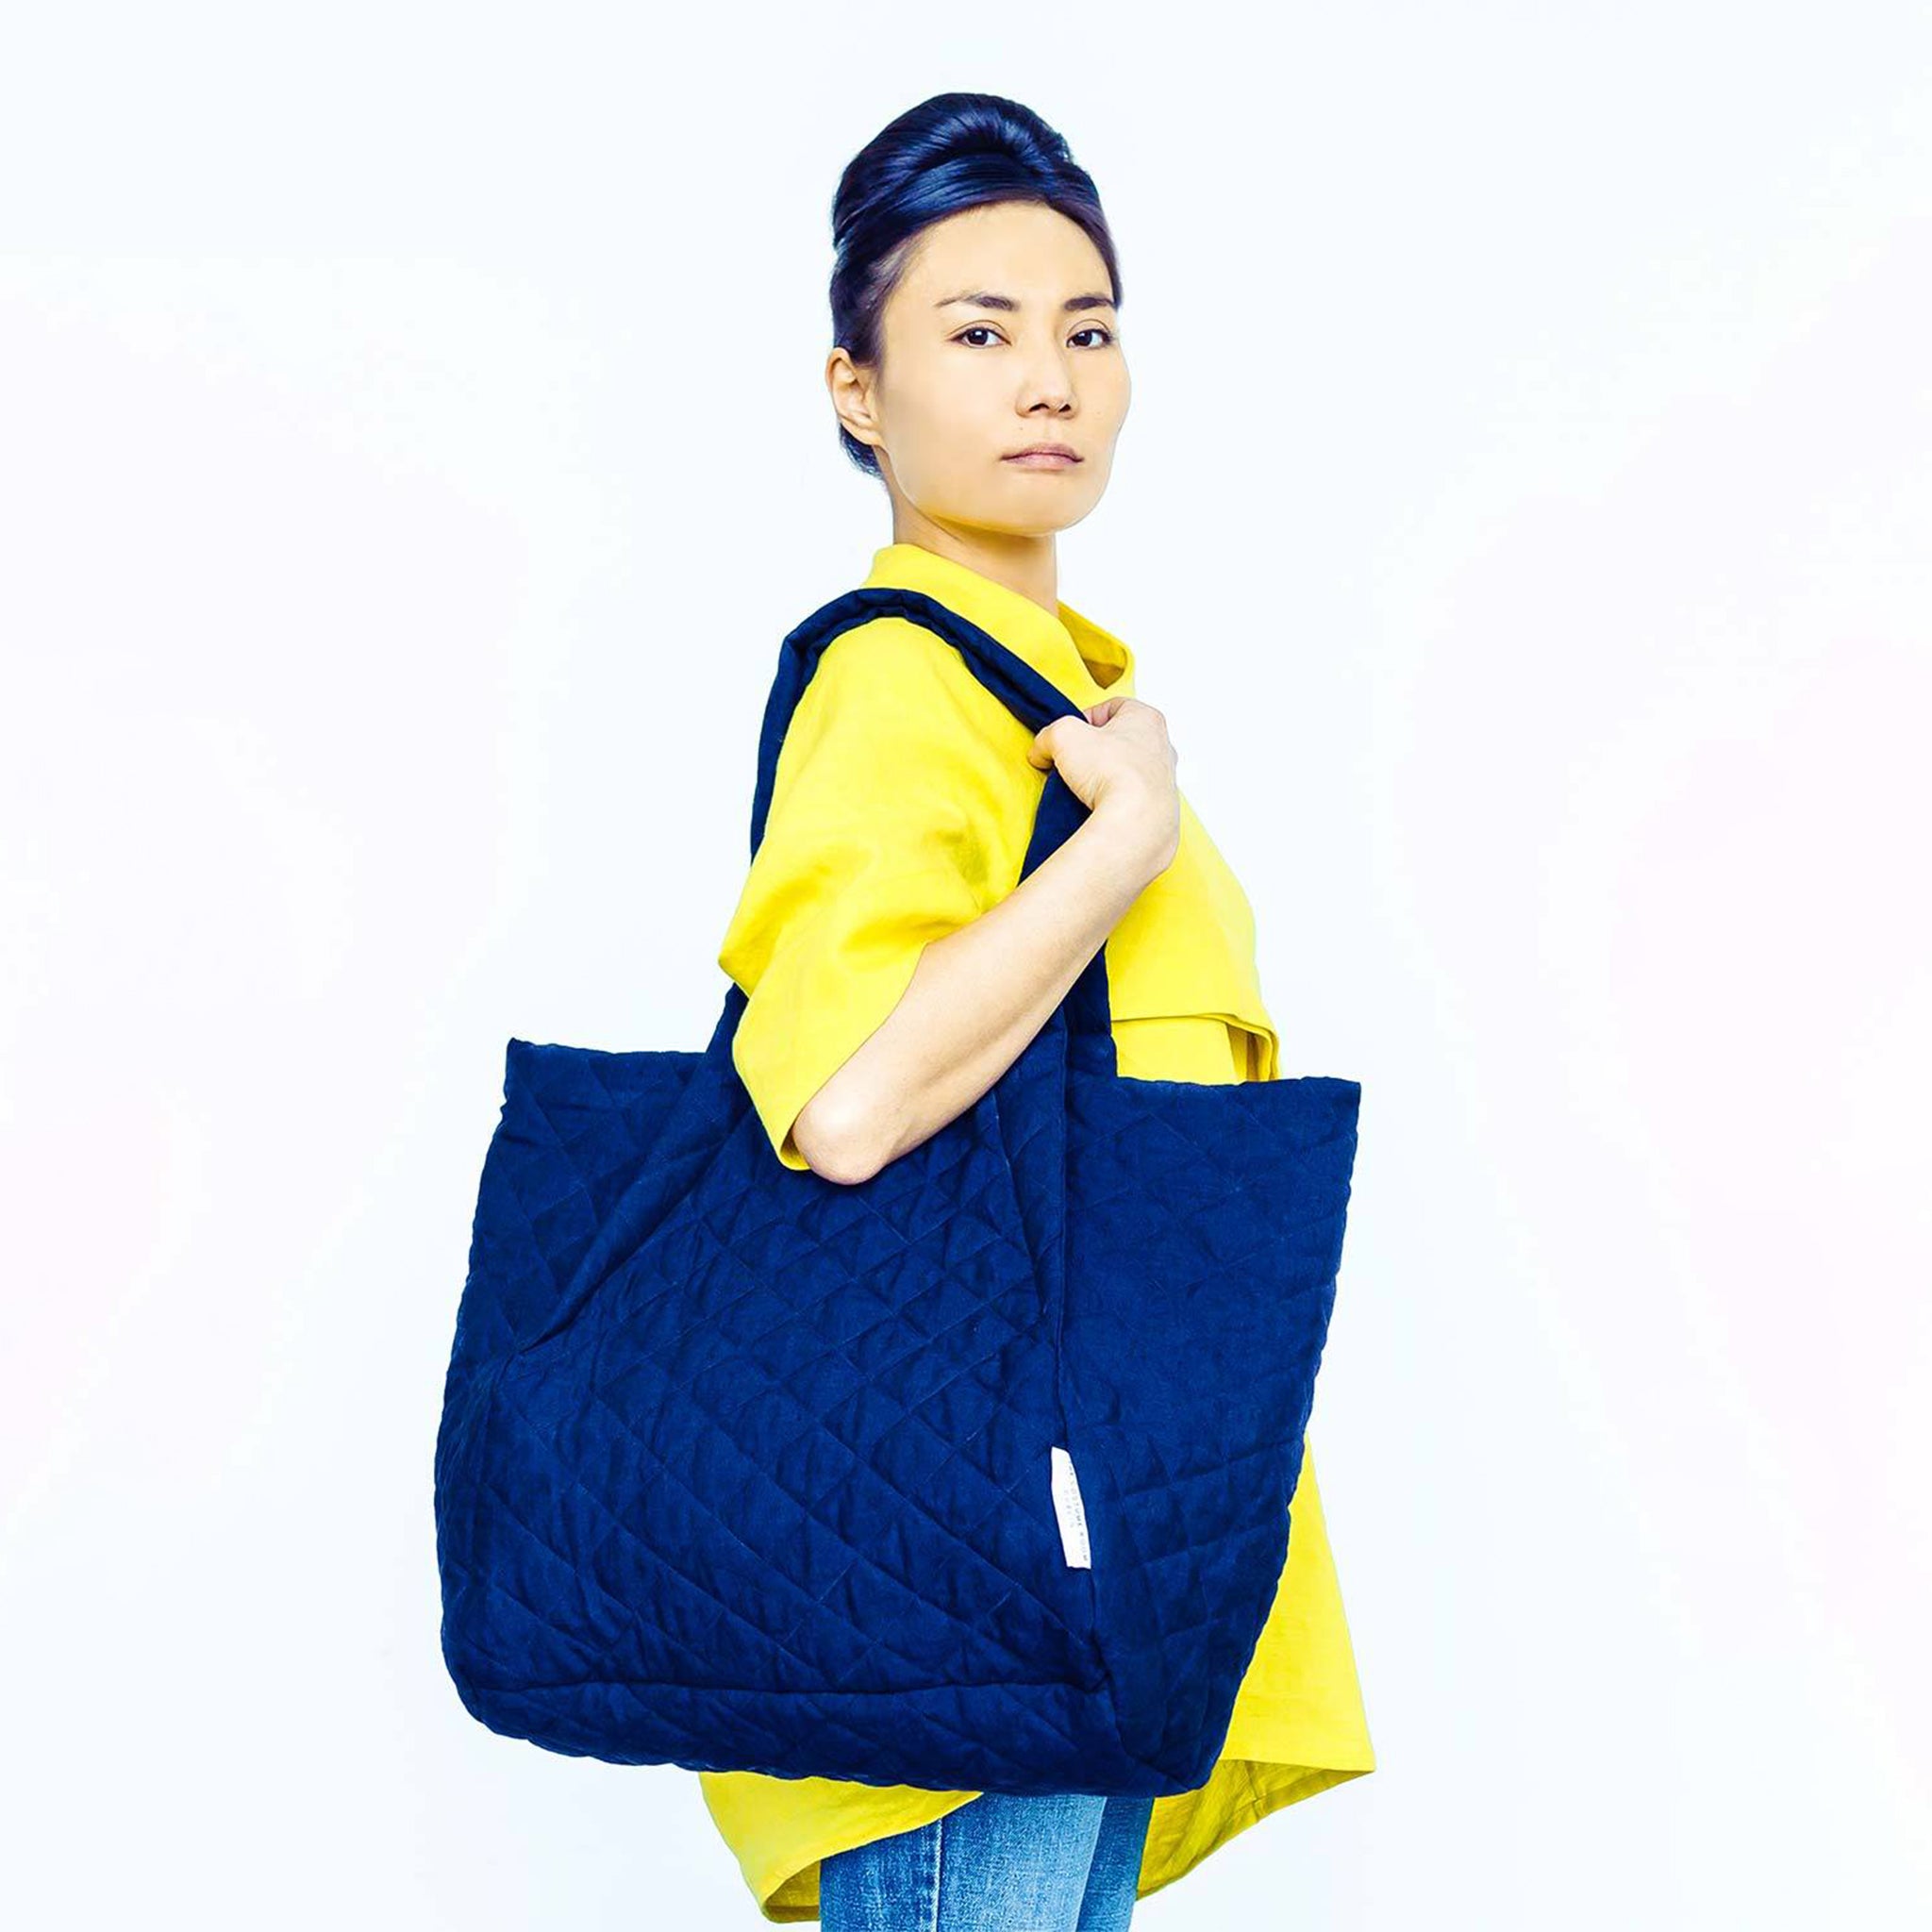 Woman wearing The Costume Room yellow Linen Top with navy blue Linen Quilted Bag on her shoulder